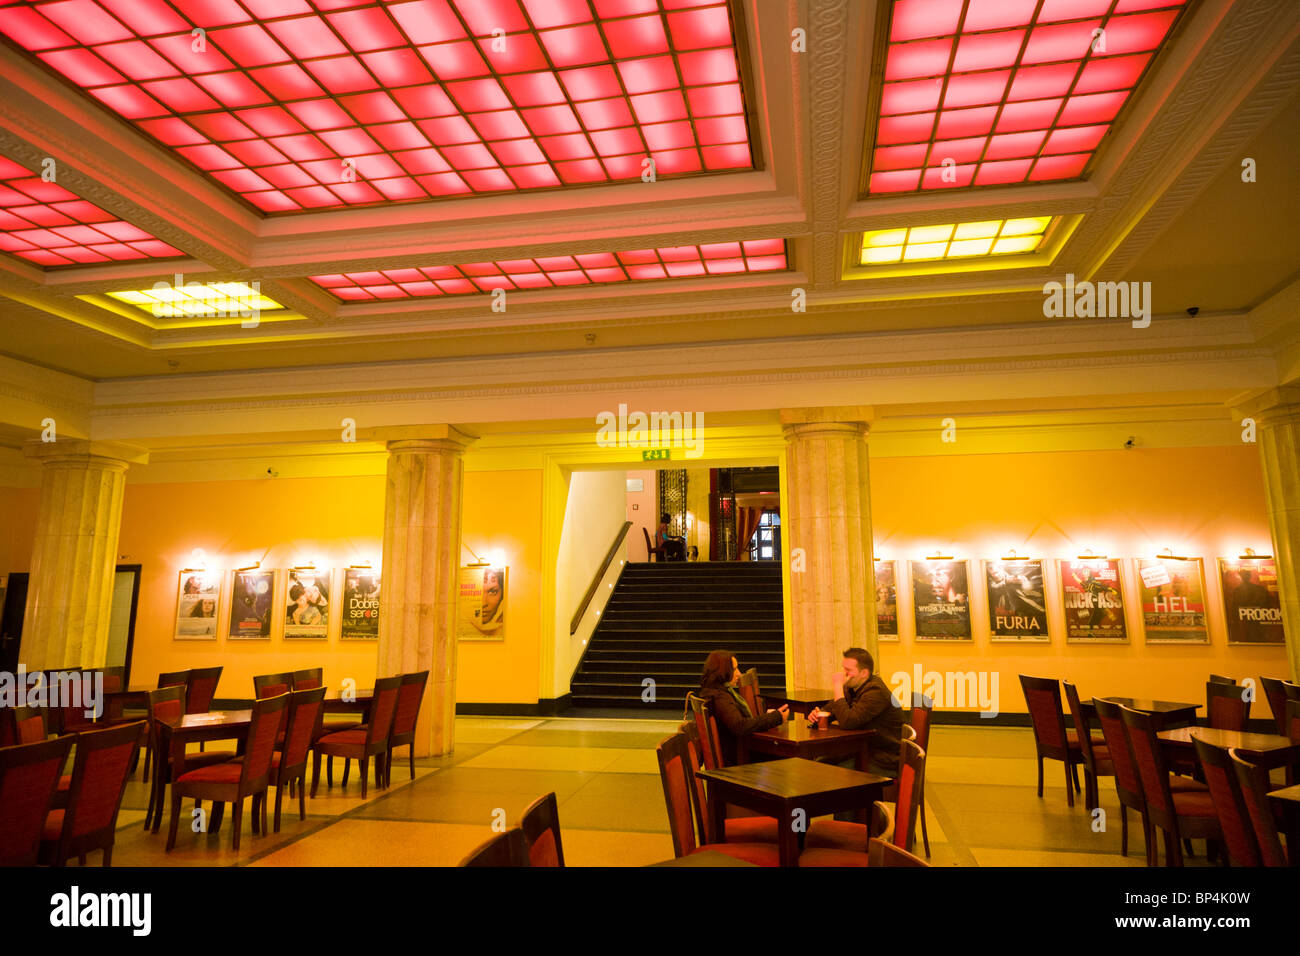 Cinema 'Kinoteka' at The Palace of Culture and Science, Warsaw Poland. Stock Photo